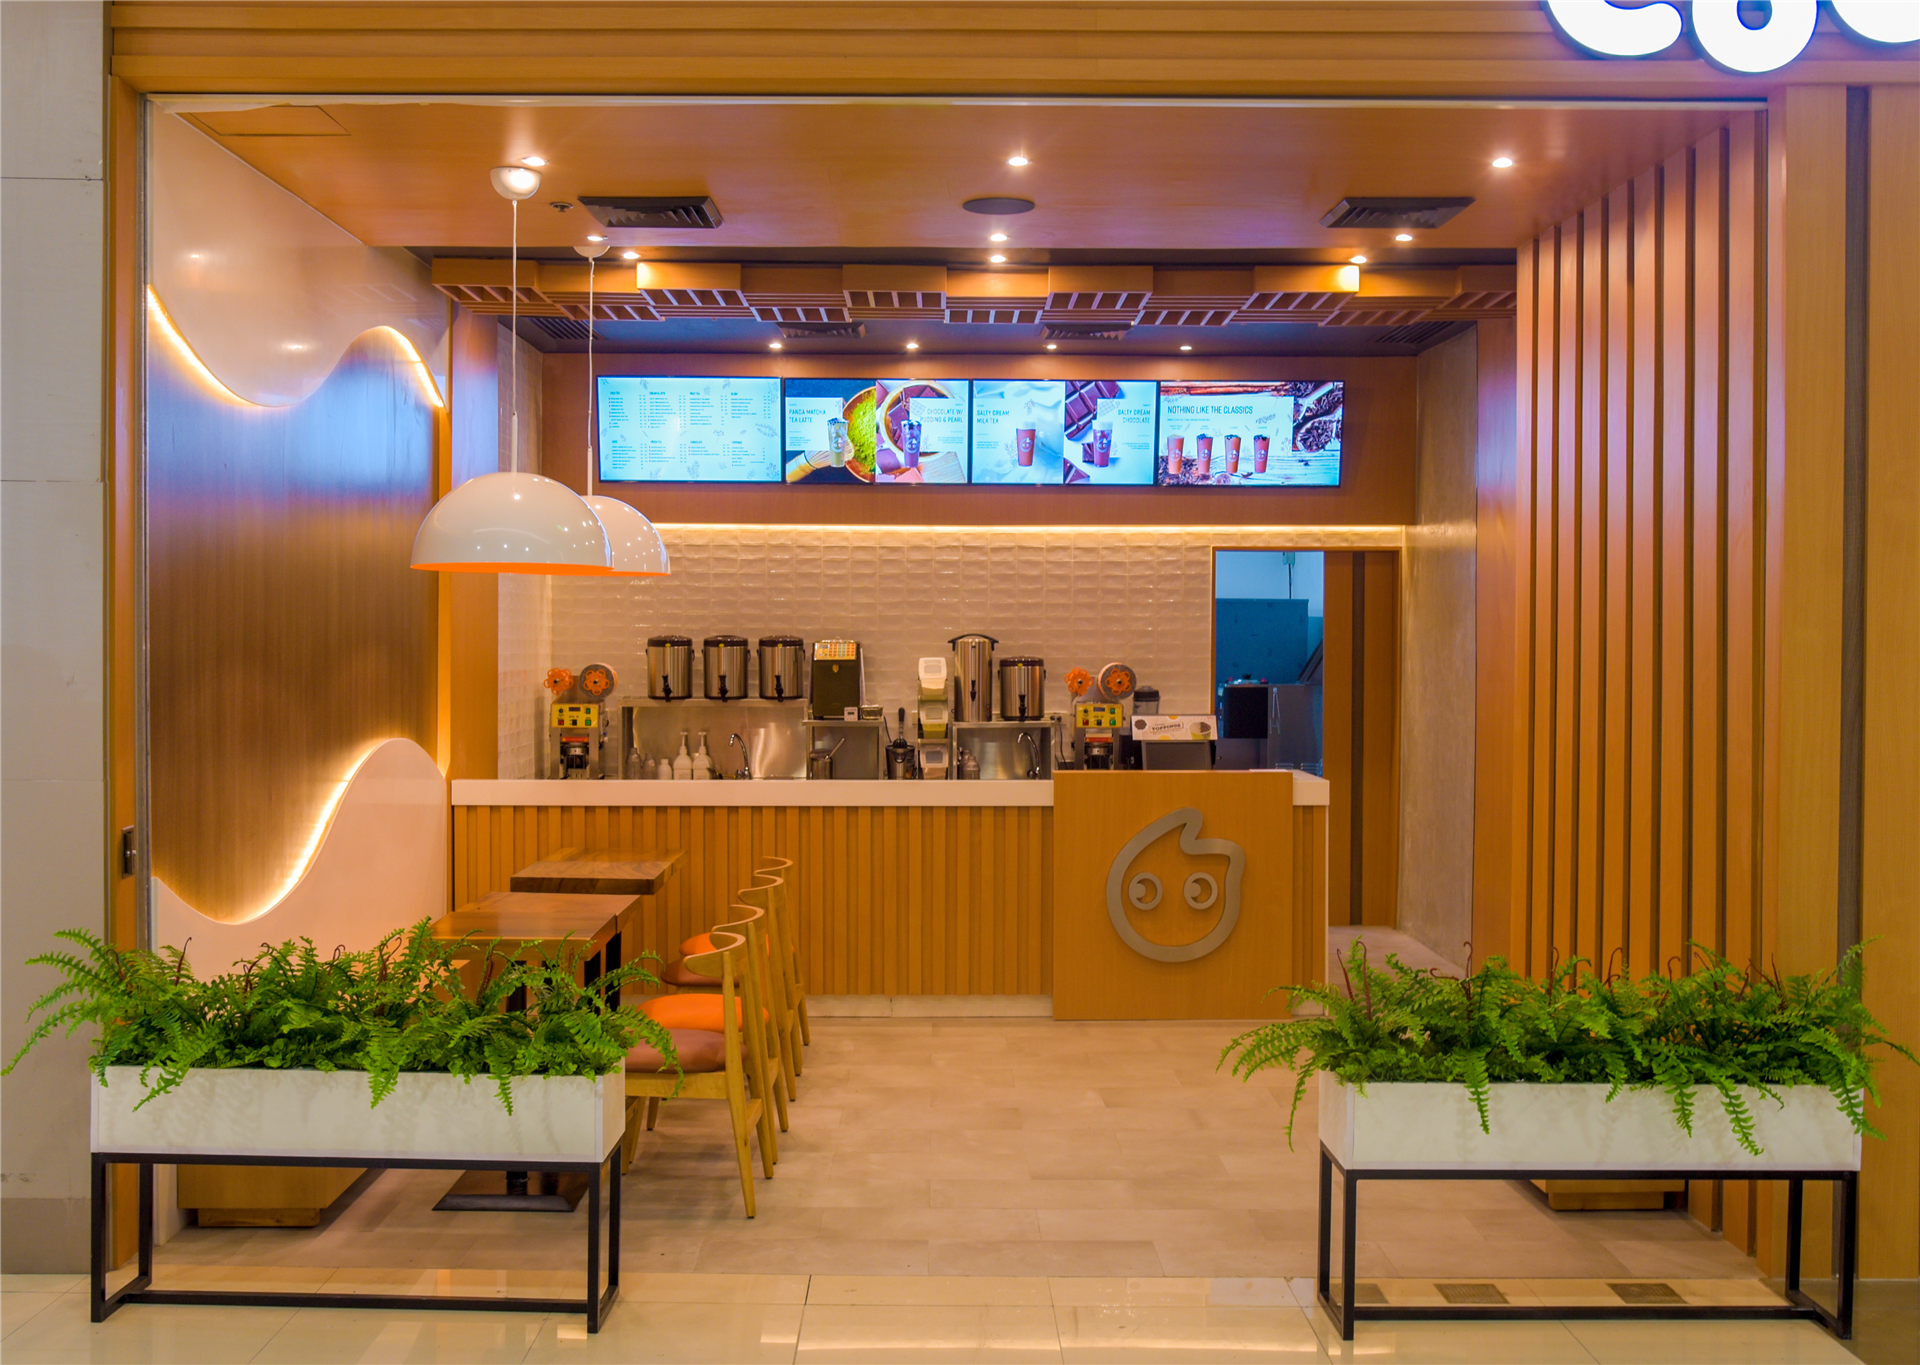 CoCo Boba Tea: A Warm and Inviting Wood-Themed Franchise Shop